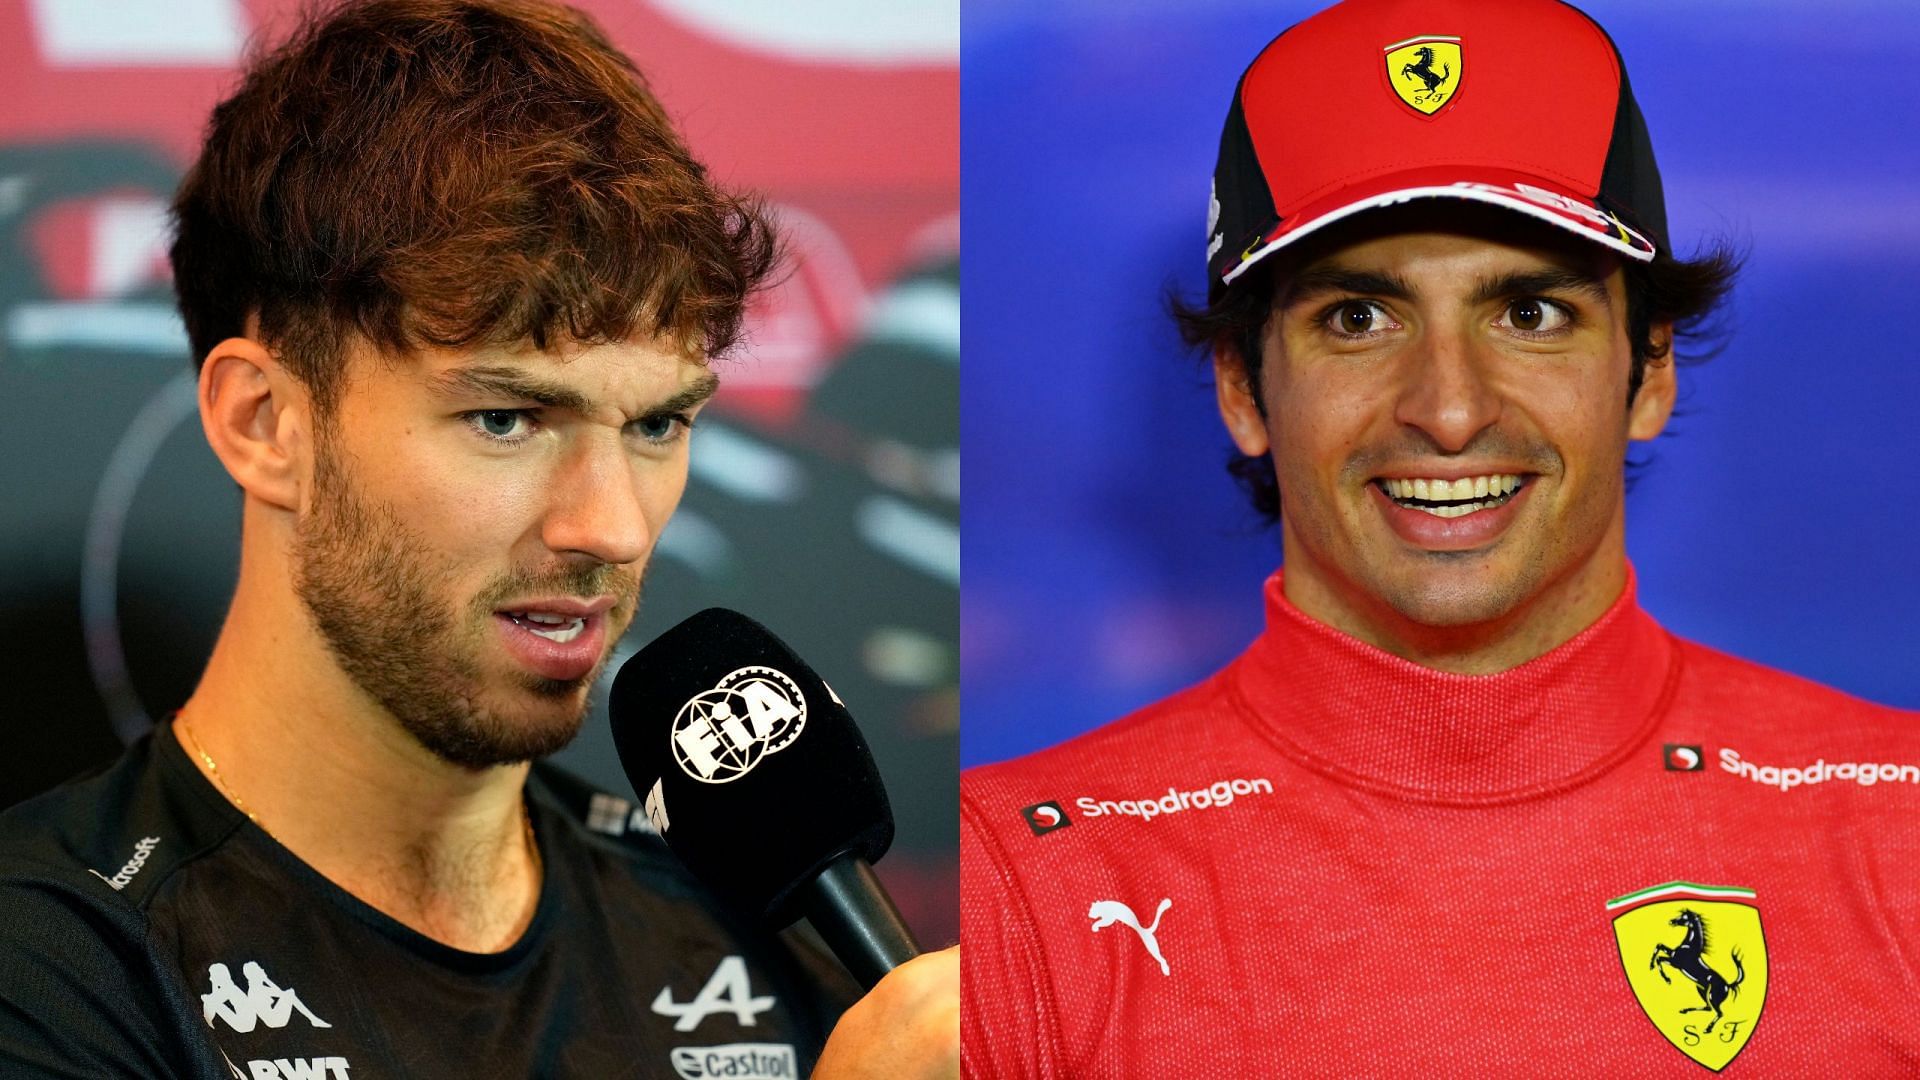 Pierre Gasly called for the FIA to ban Carlos Sainz.